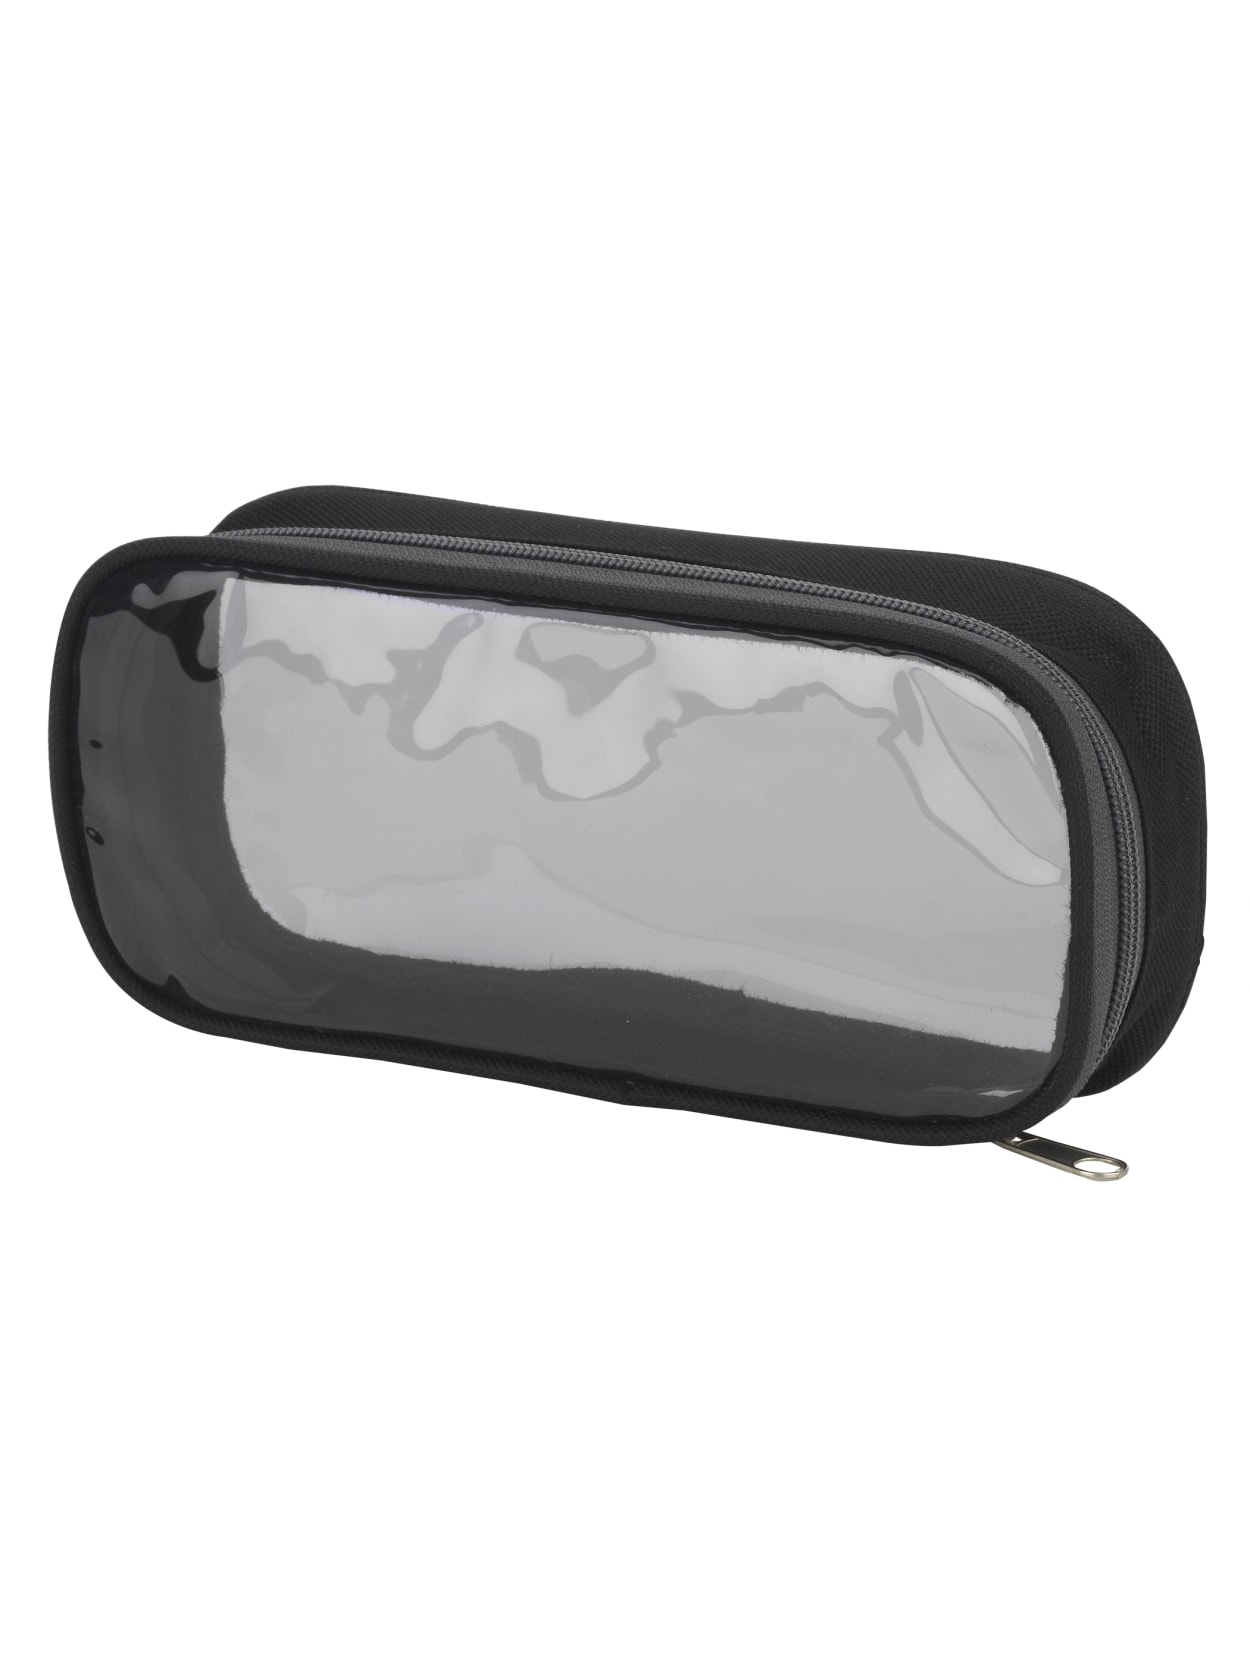 Office Depot Clear Pencil Pouch Gray 